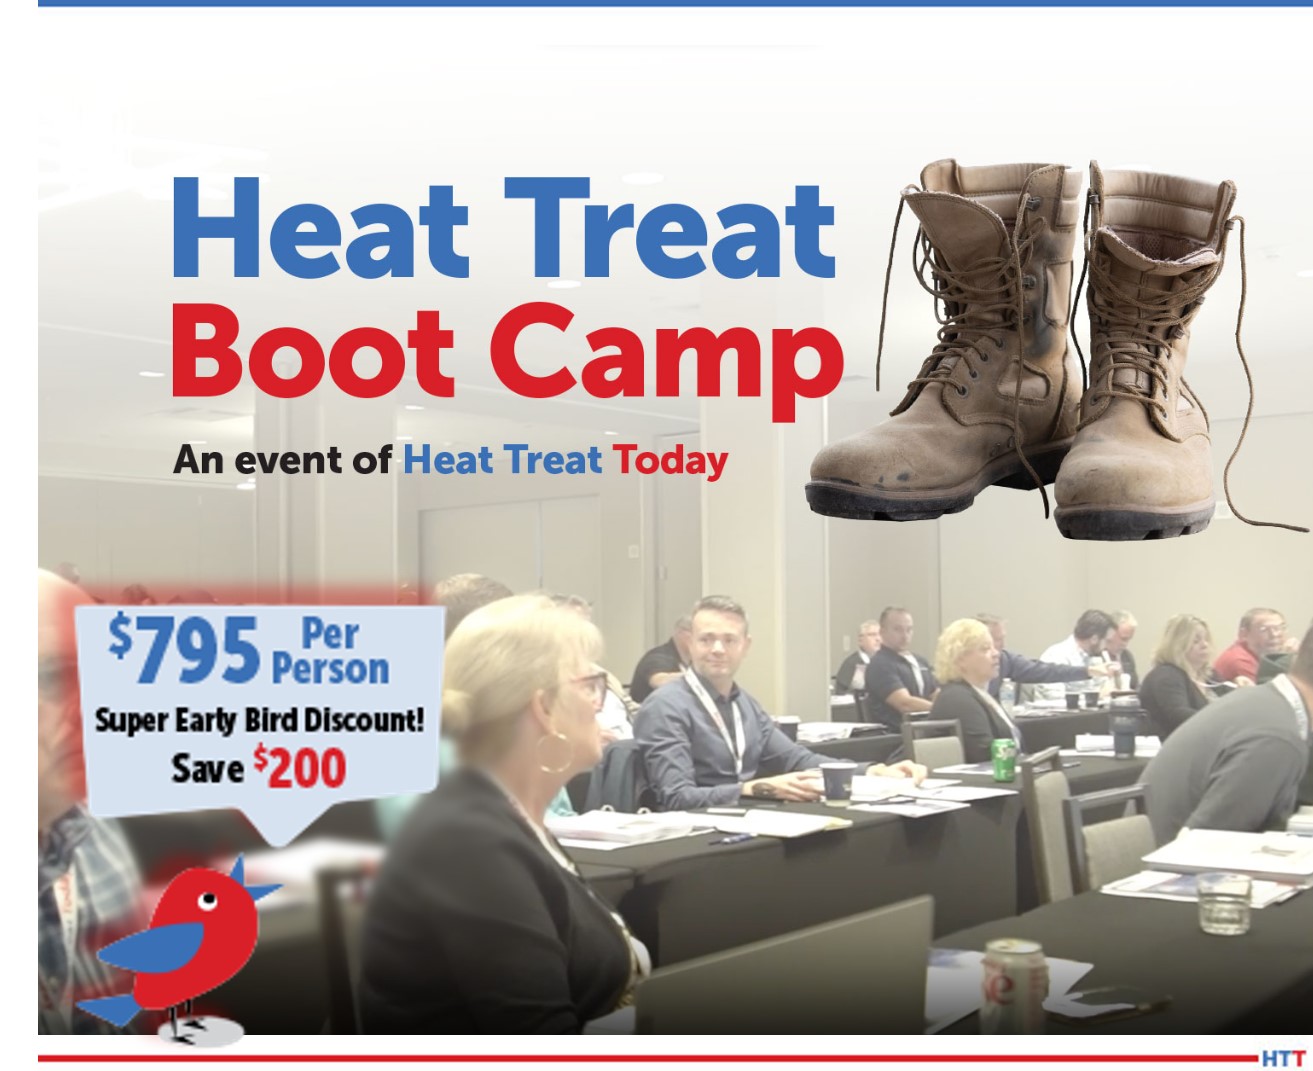 Heat Treat Boot Camp Event with Early Bird Pricing “$795”